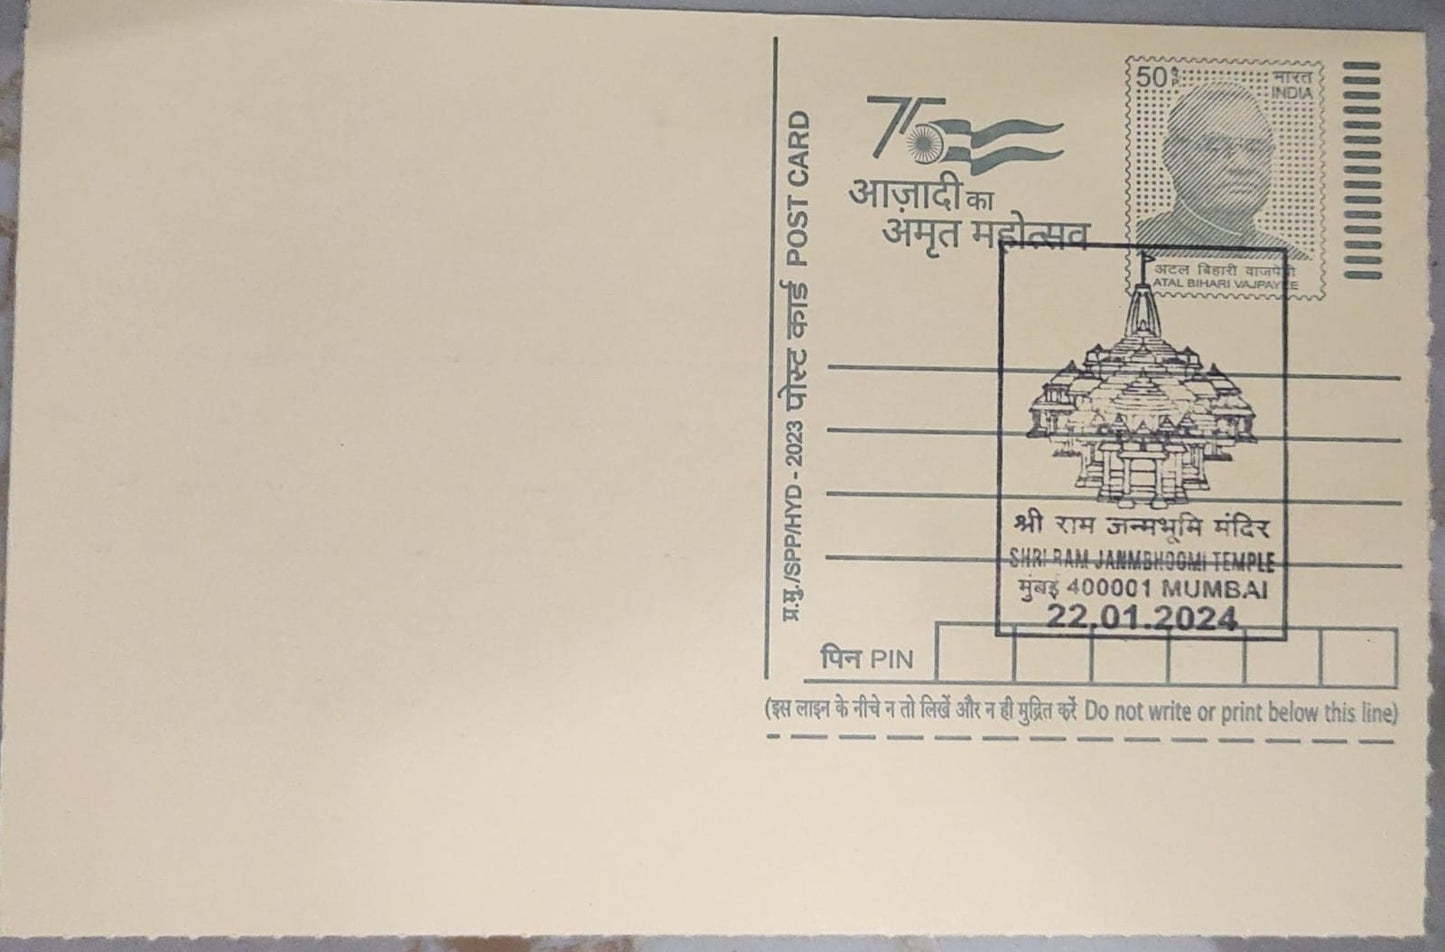 Sri Ram temple special cancellation from Mumbai, date 22.1.24   On normal postcard.